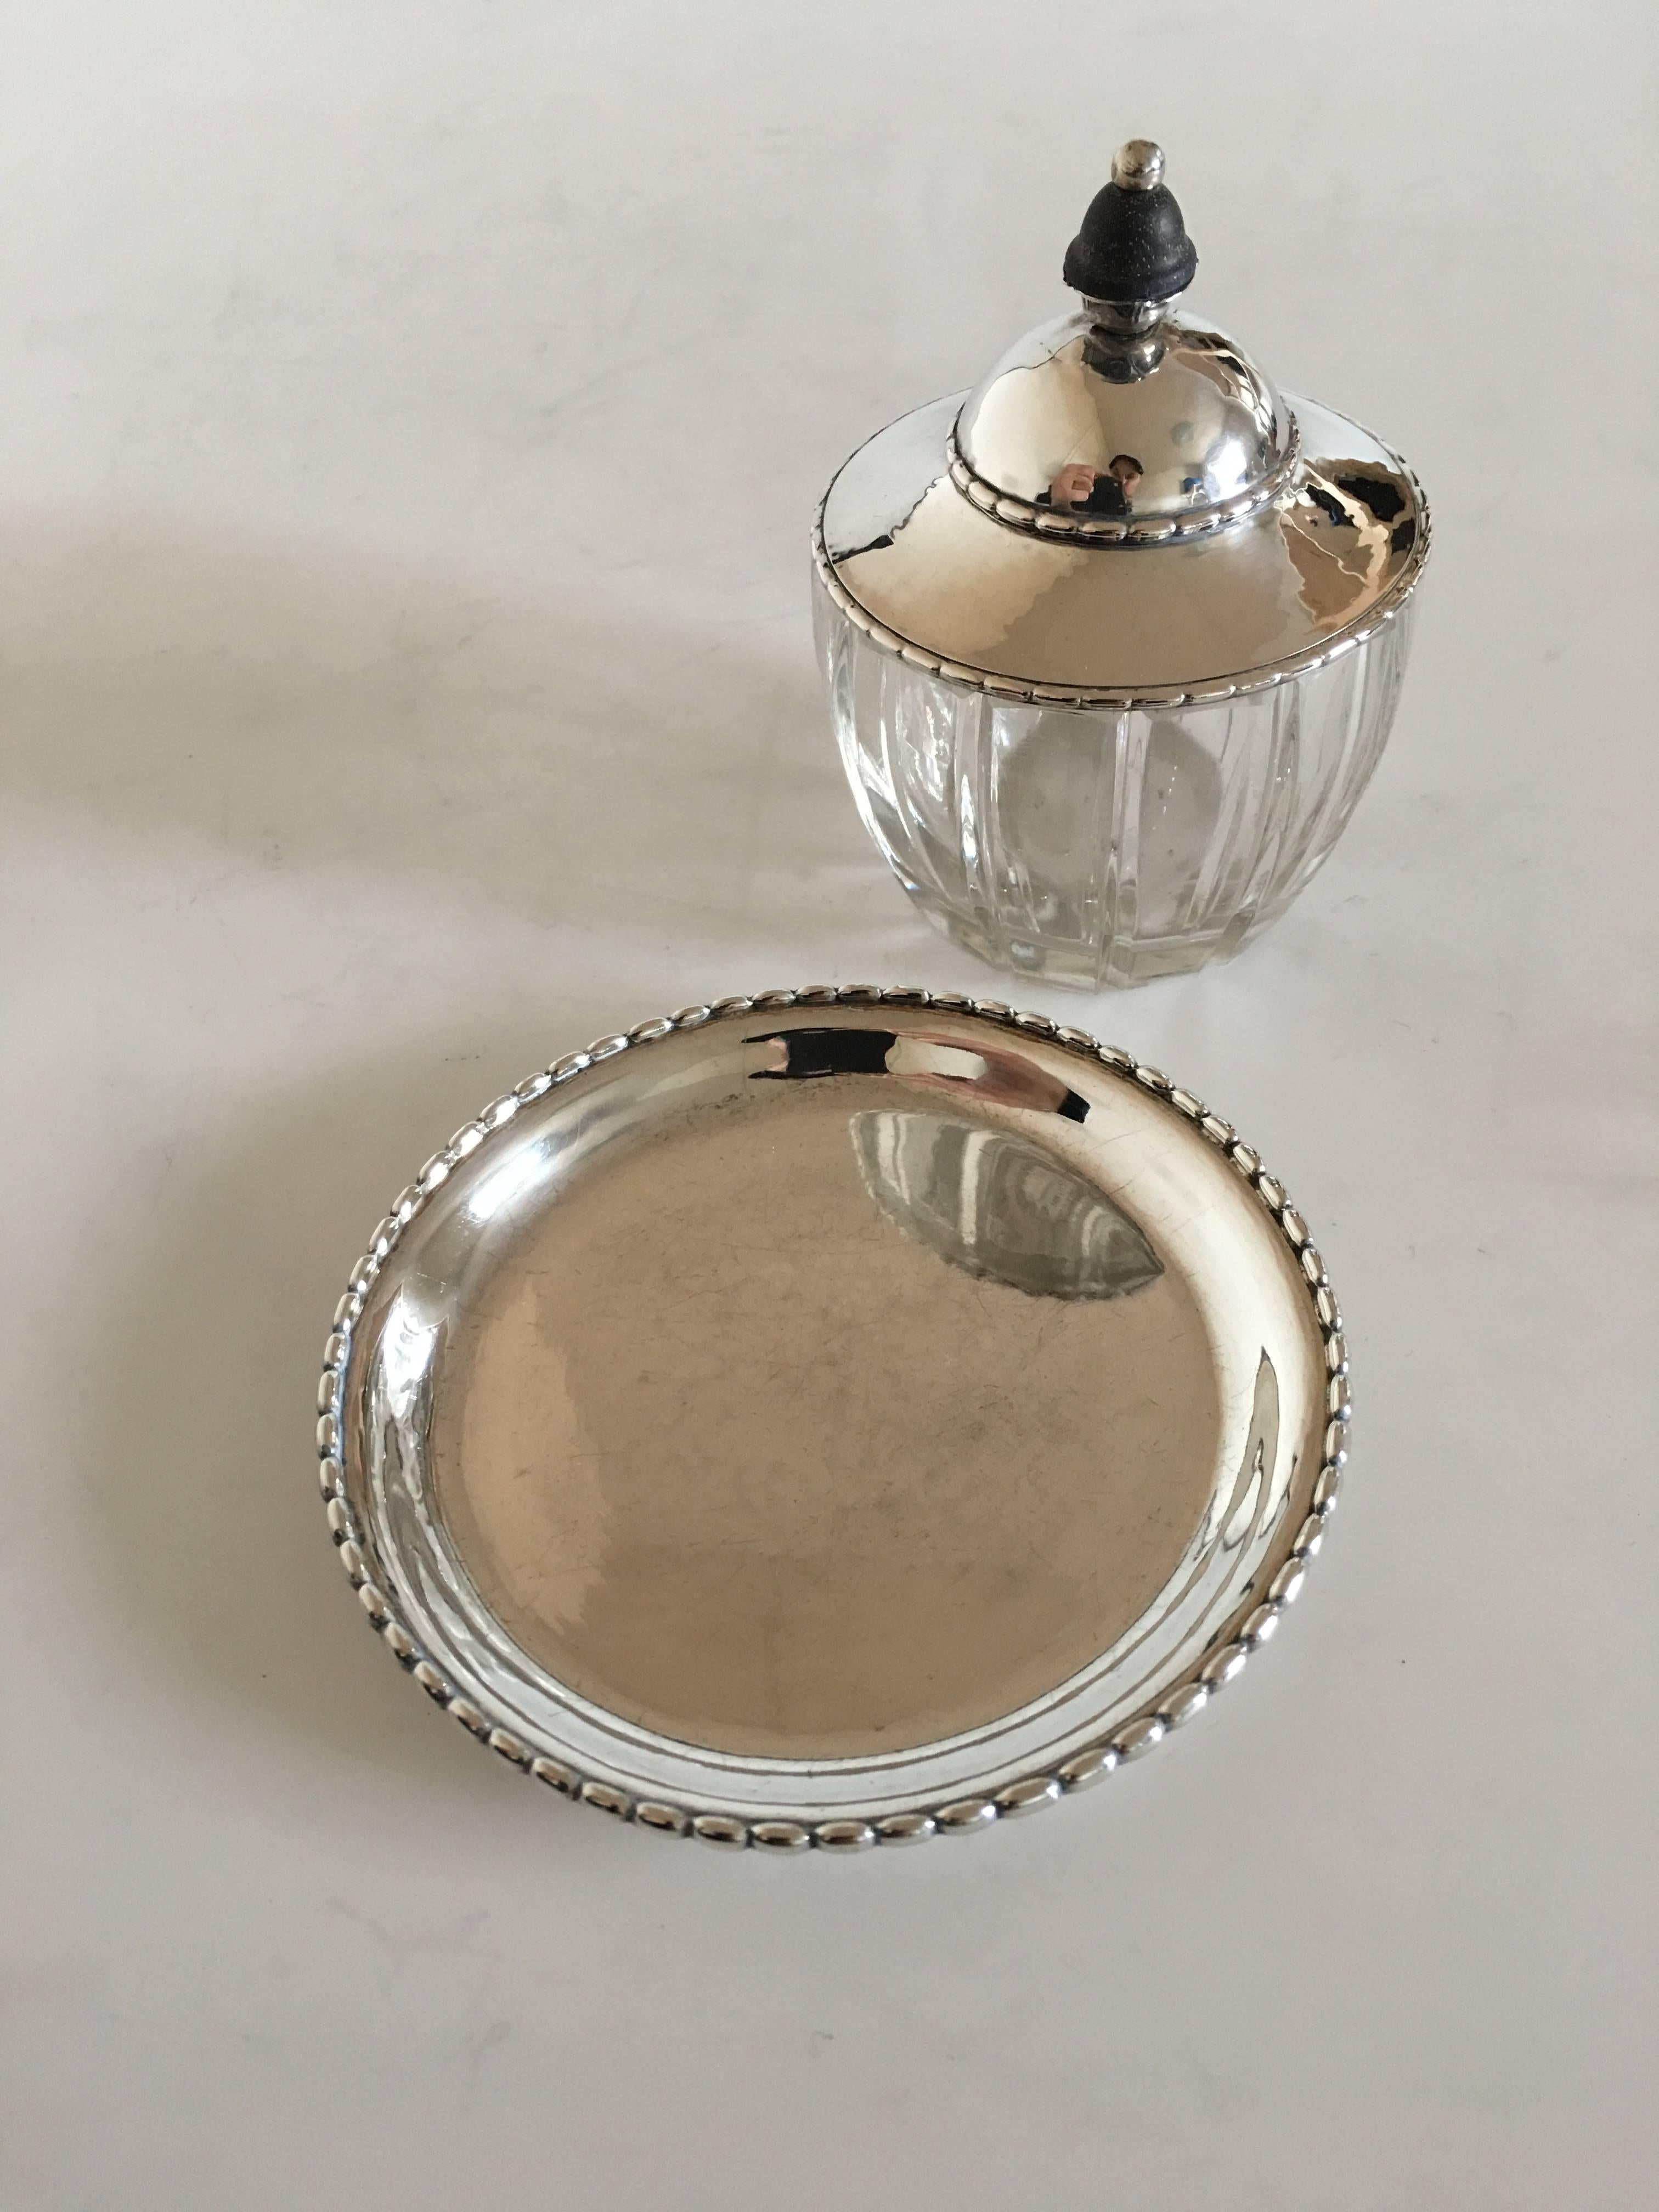 20th Century Grann & Laglye Lid with Crystal Jar on a Georg Jensen Sterling Silver Tray #209